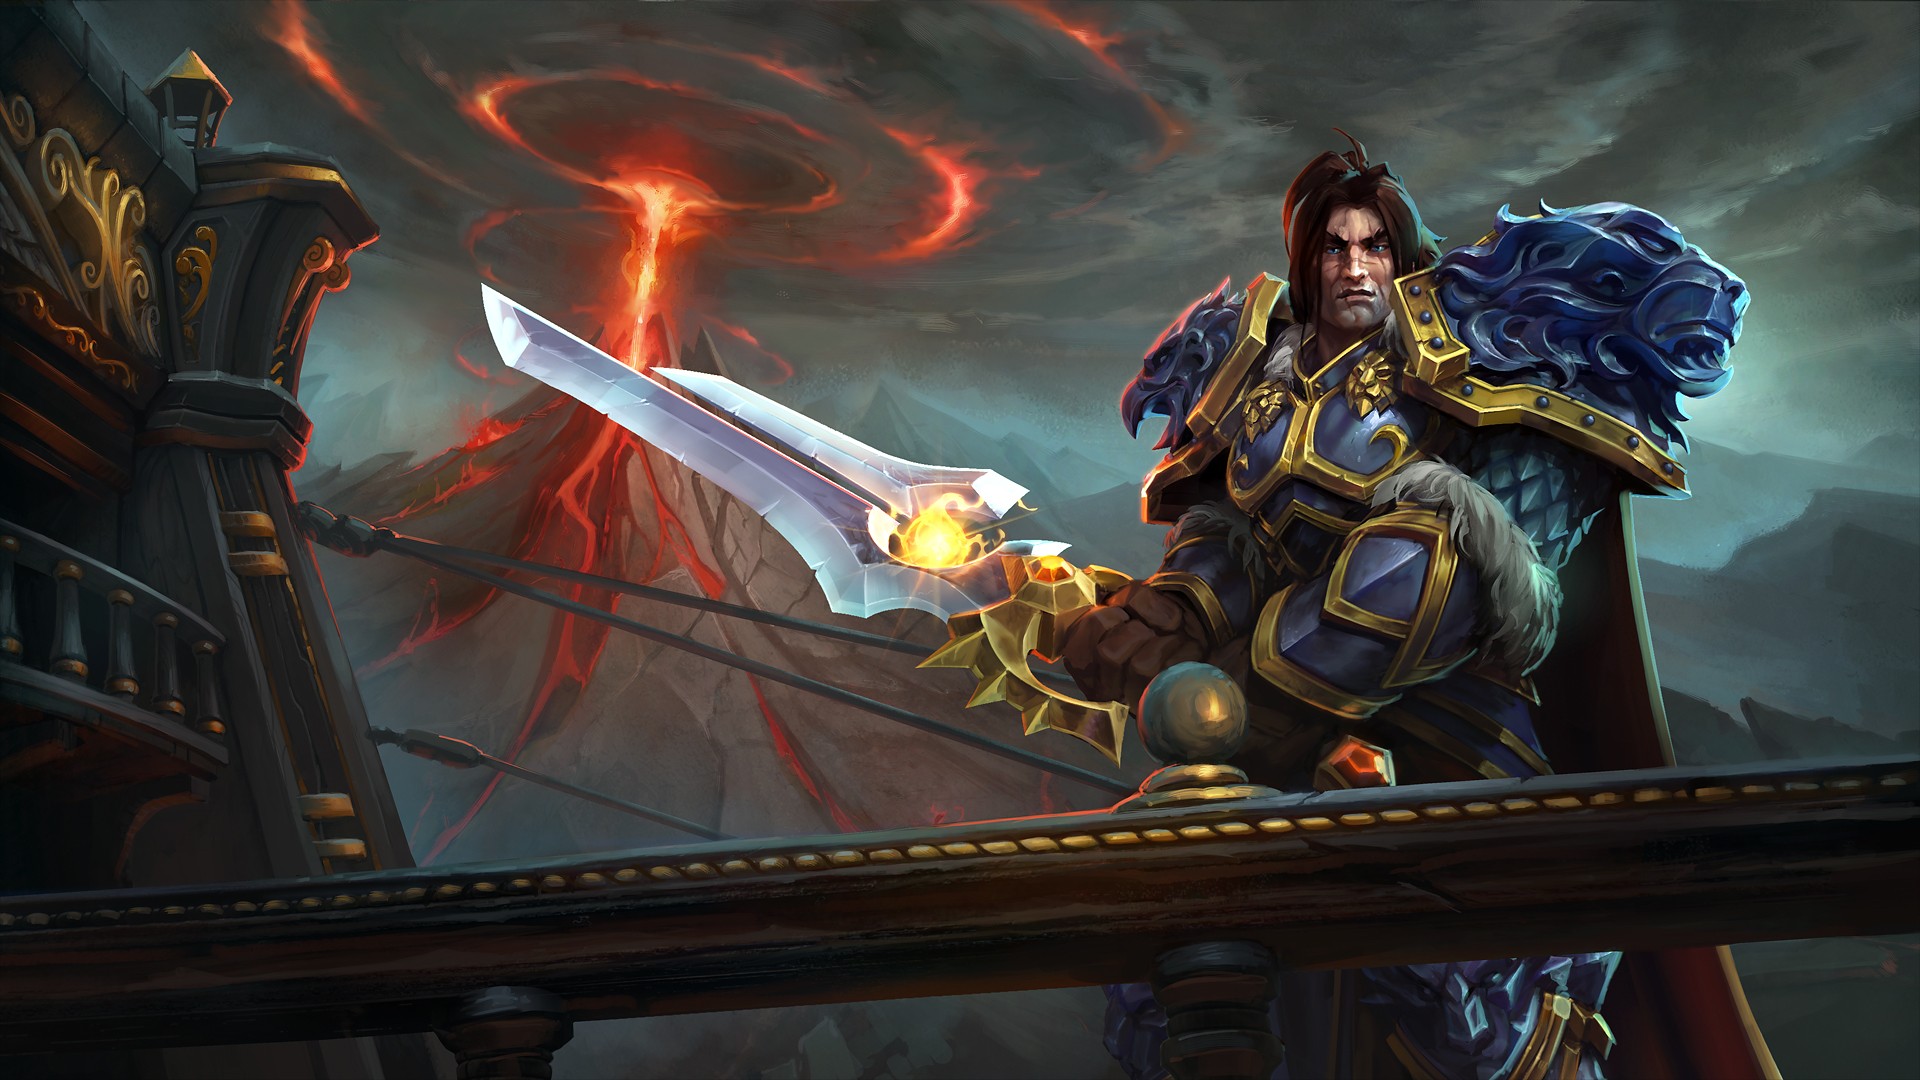 Heroes Of The Storm King Varian Wrynn Video Games 1920x1080